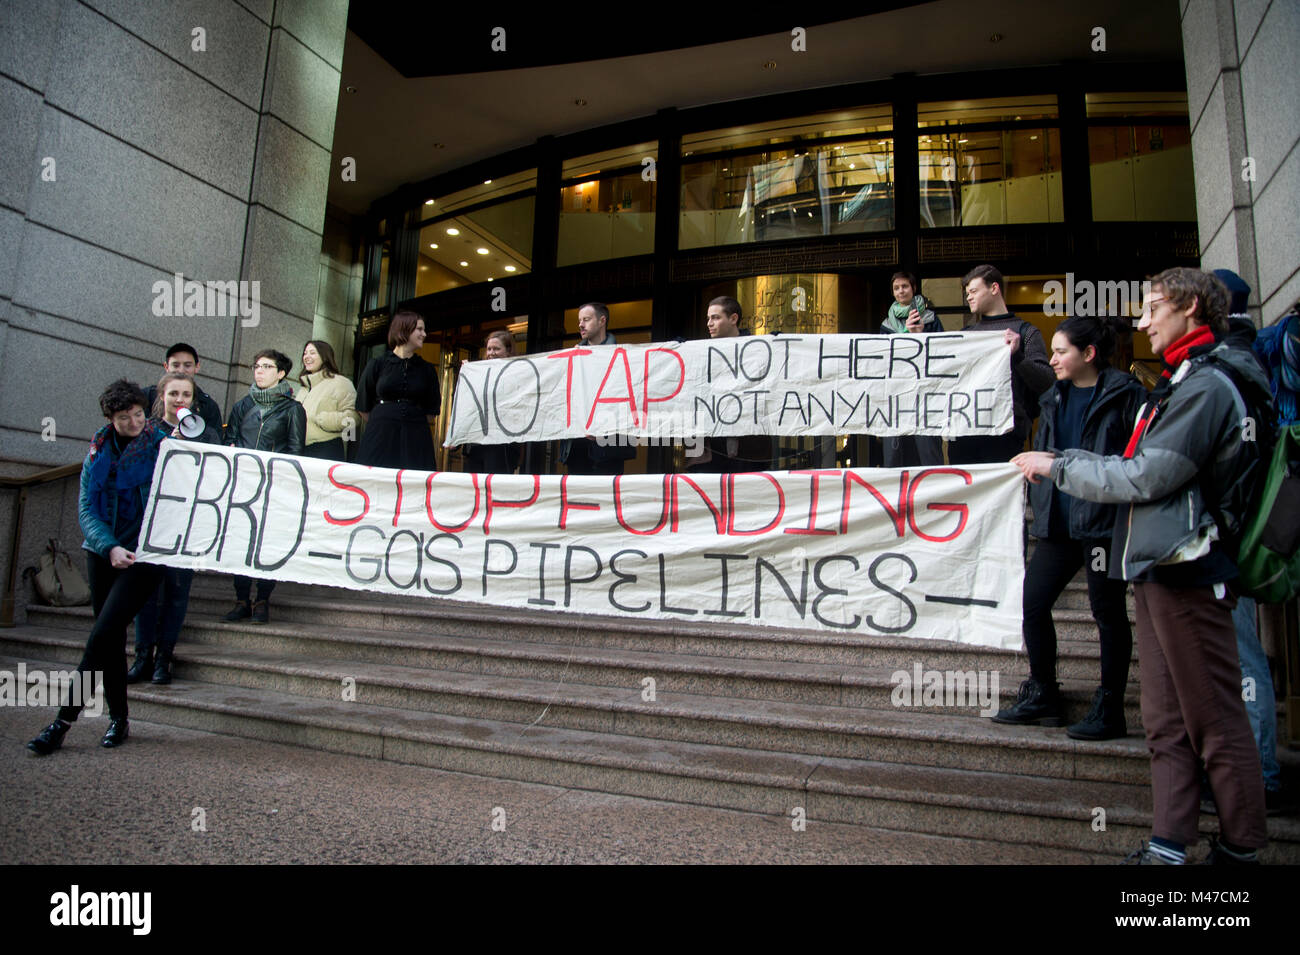 London, UK. 15th February, 2018. Demonstration outside the European Bank for Reconstruction and Development to demand that the bank pledges not to invest in the Trans-Adriatic Pipeline (TAP). On February 17th 2018 the EBRD will close its public consultation and decide whether to give 500 million Euros to the pipeline that aims to bring gas from Azerbijan to Europe. Credit: Jenny Matthews/Alamy Live News Stock Photo